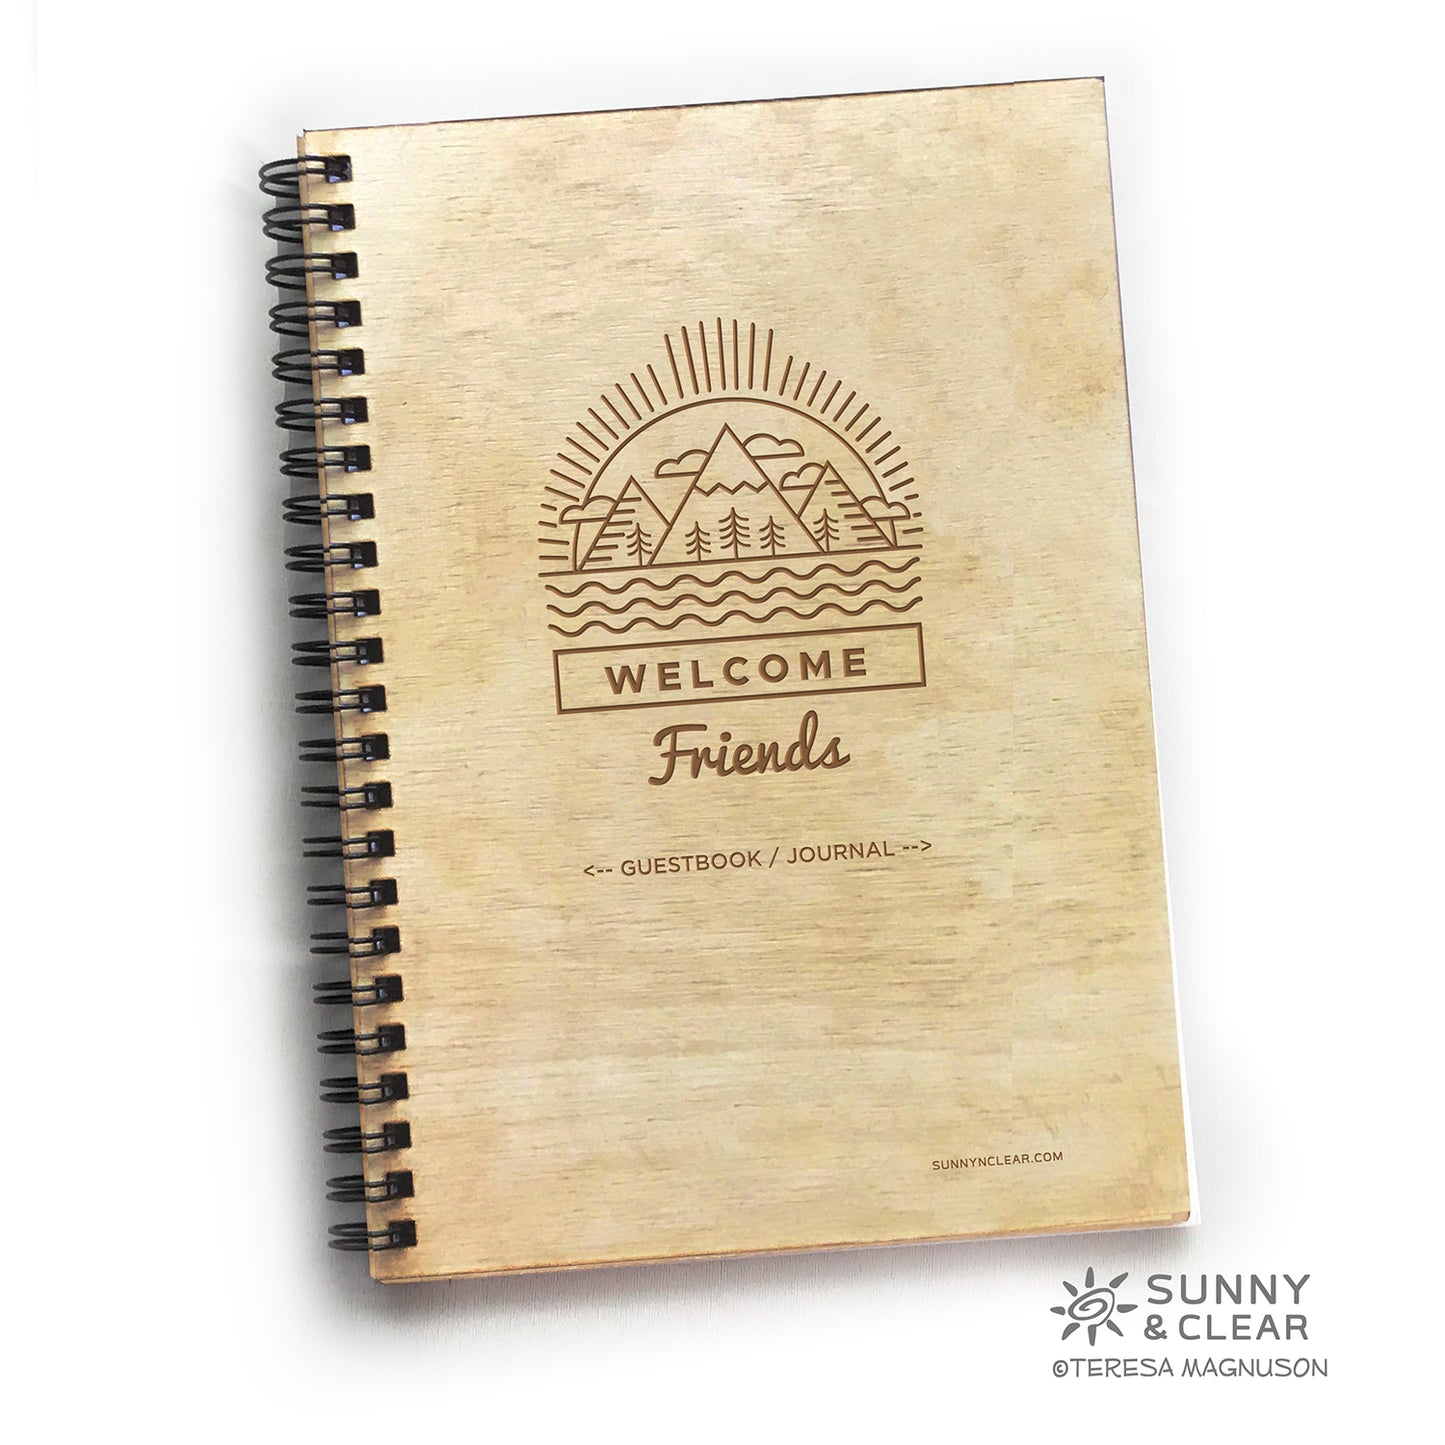 Welcome Friends Guest Book, Mountain Home, Personalized